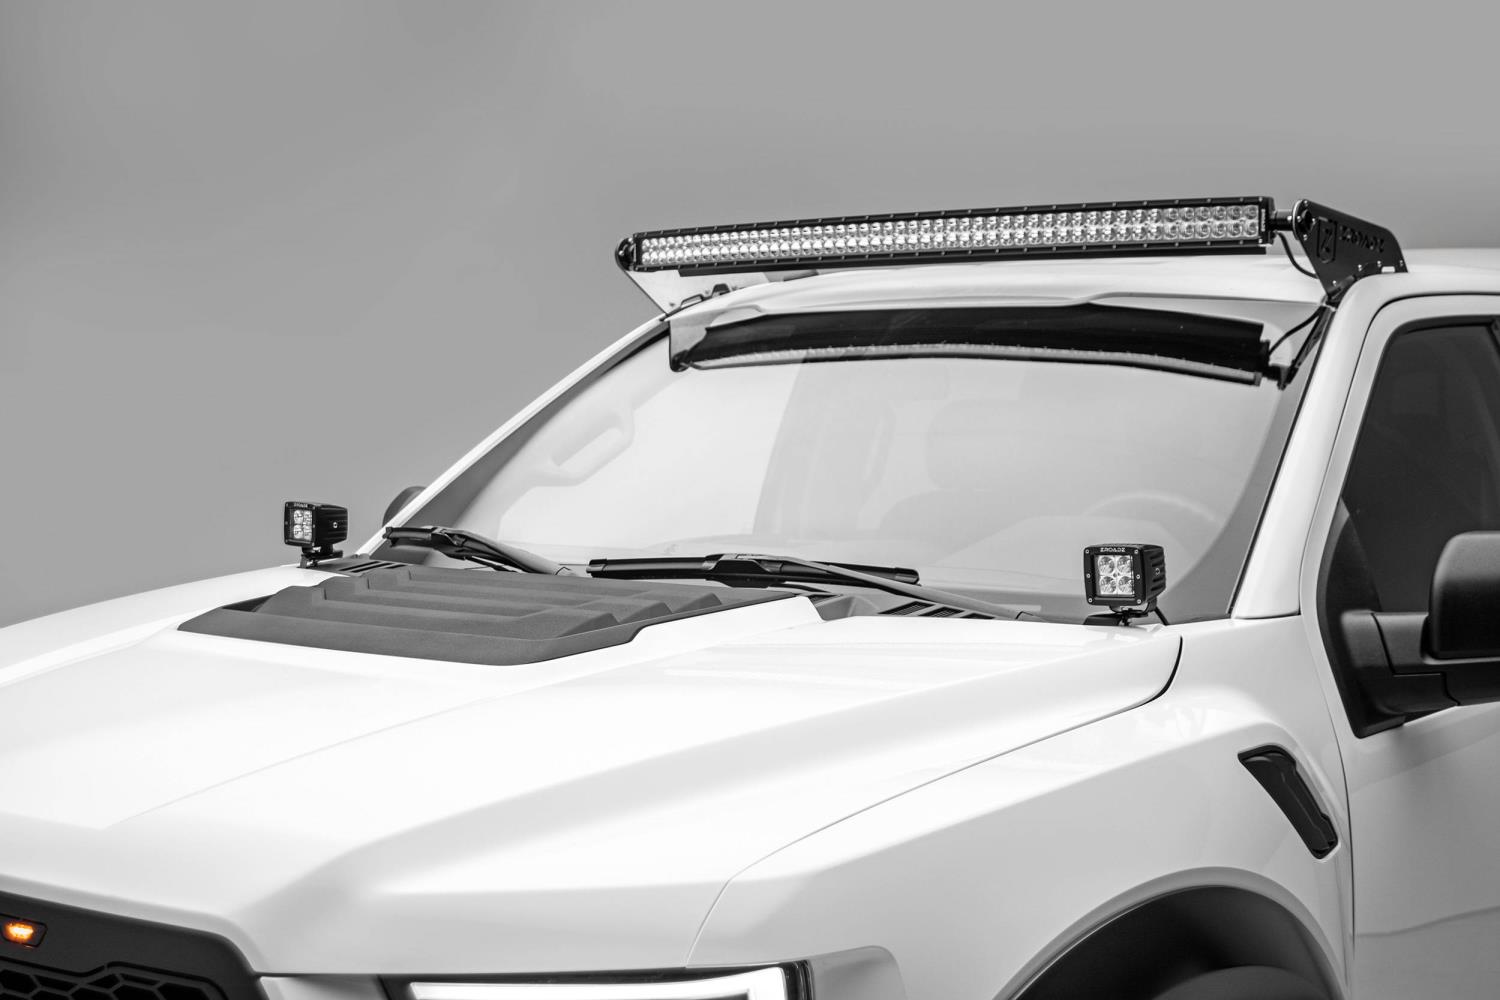 FRONT ROOF LIGHT MOUNTS